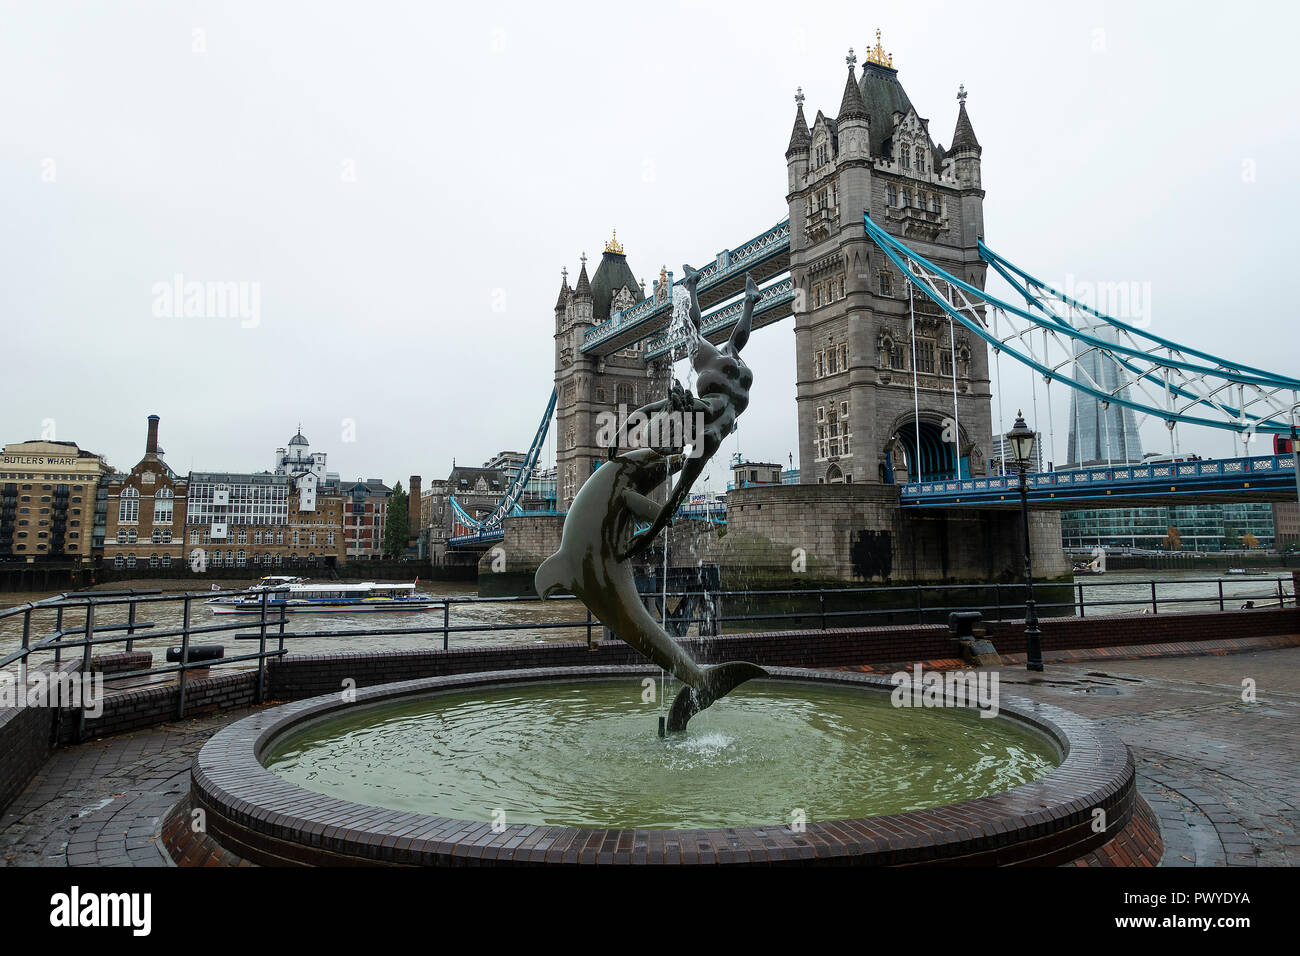 Tower Bridge Crossing the River Thames with Butlers Wharf from the Girl with a Dolphin Fountain on the North Bank London England United Kingdom Stock Photo